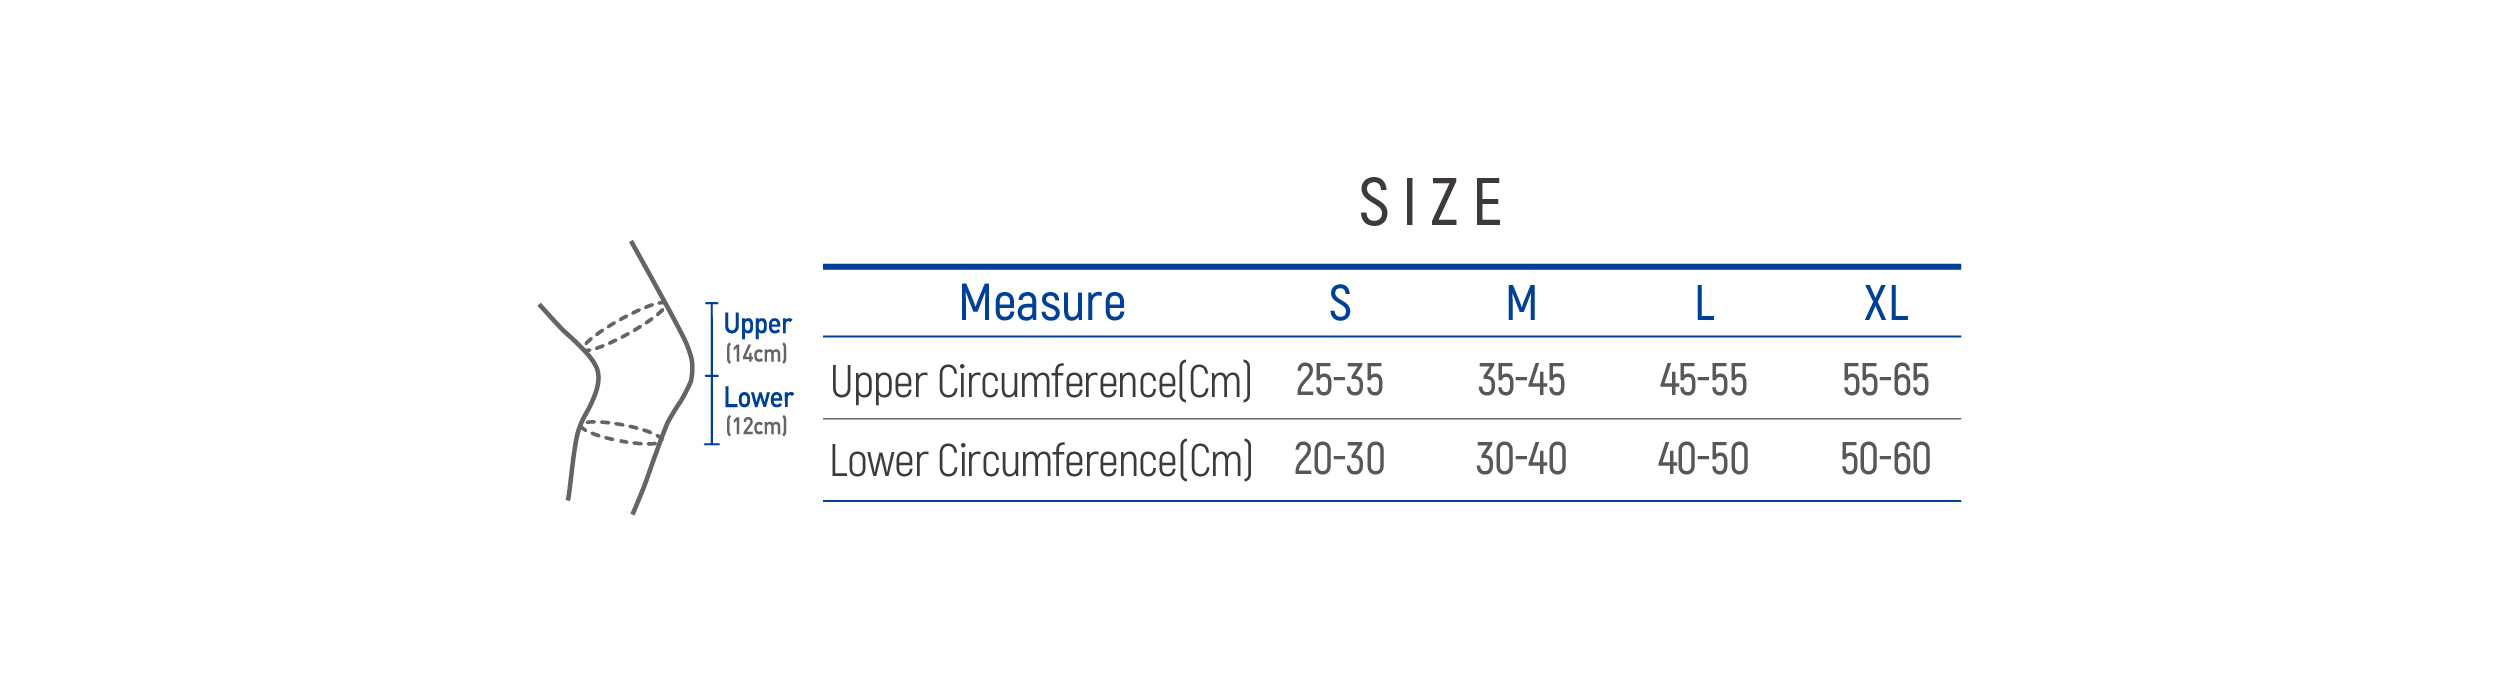 DR-K021 Size table image